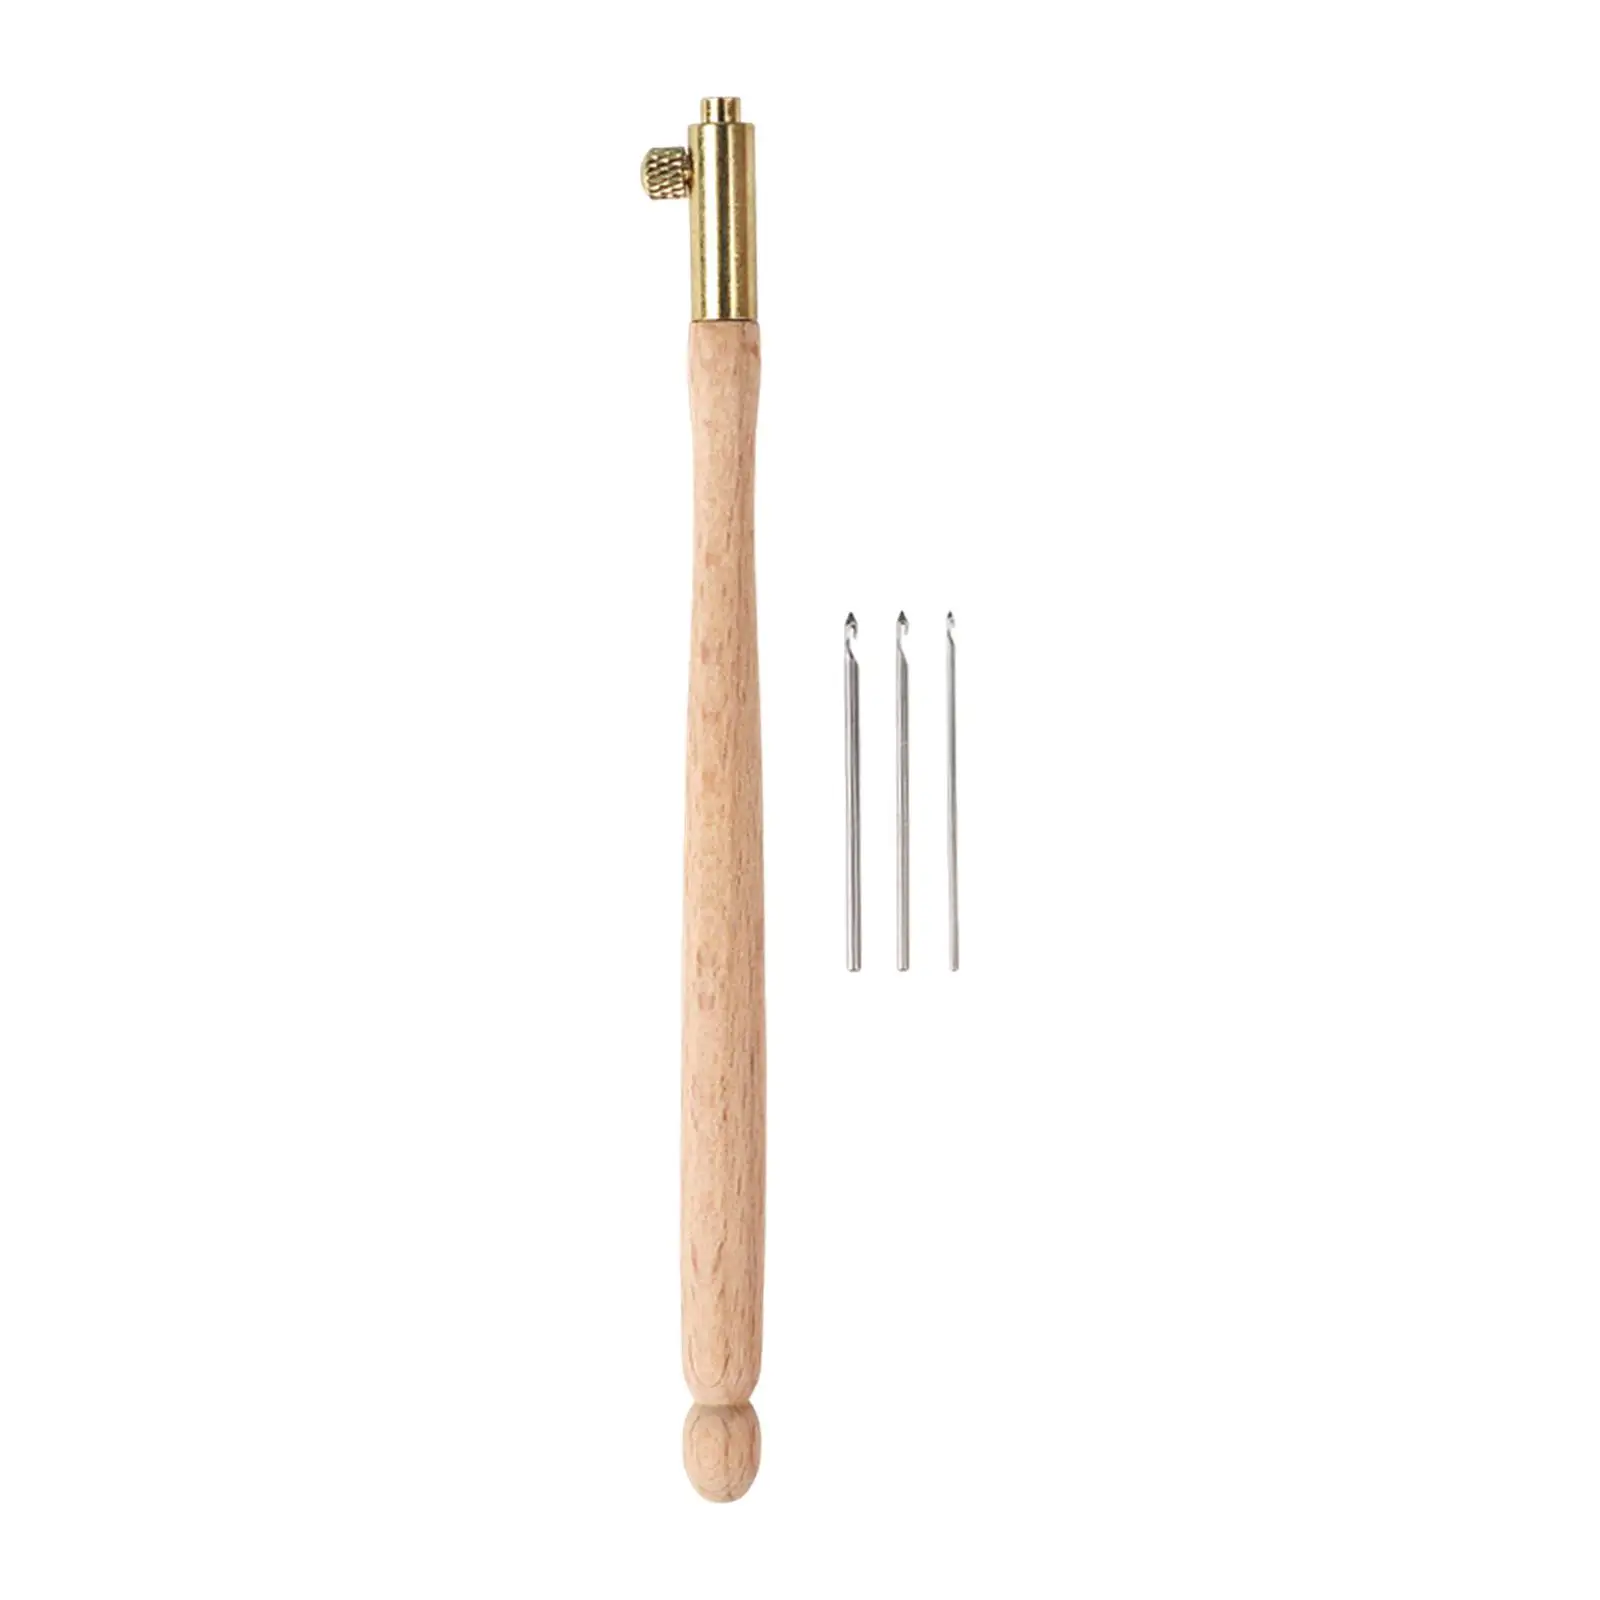 Tambour Hook Embroidery Beading Tools Set 0.7mm/1.0mm/1.2mm Sequin Beads Set Wooden Handle Tambour Beading for Sewing Knitting